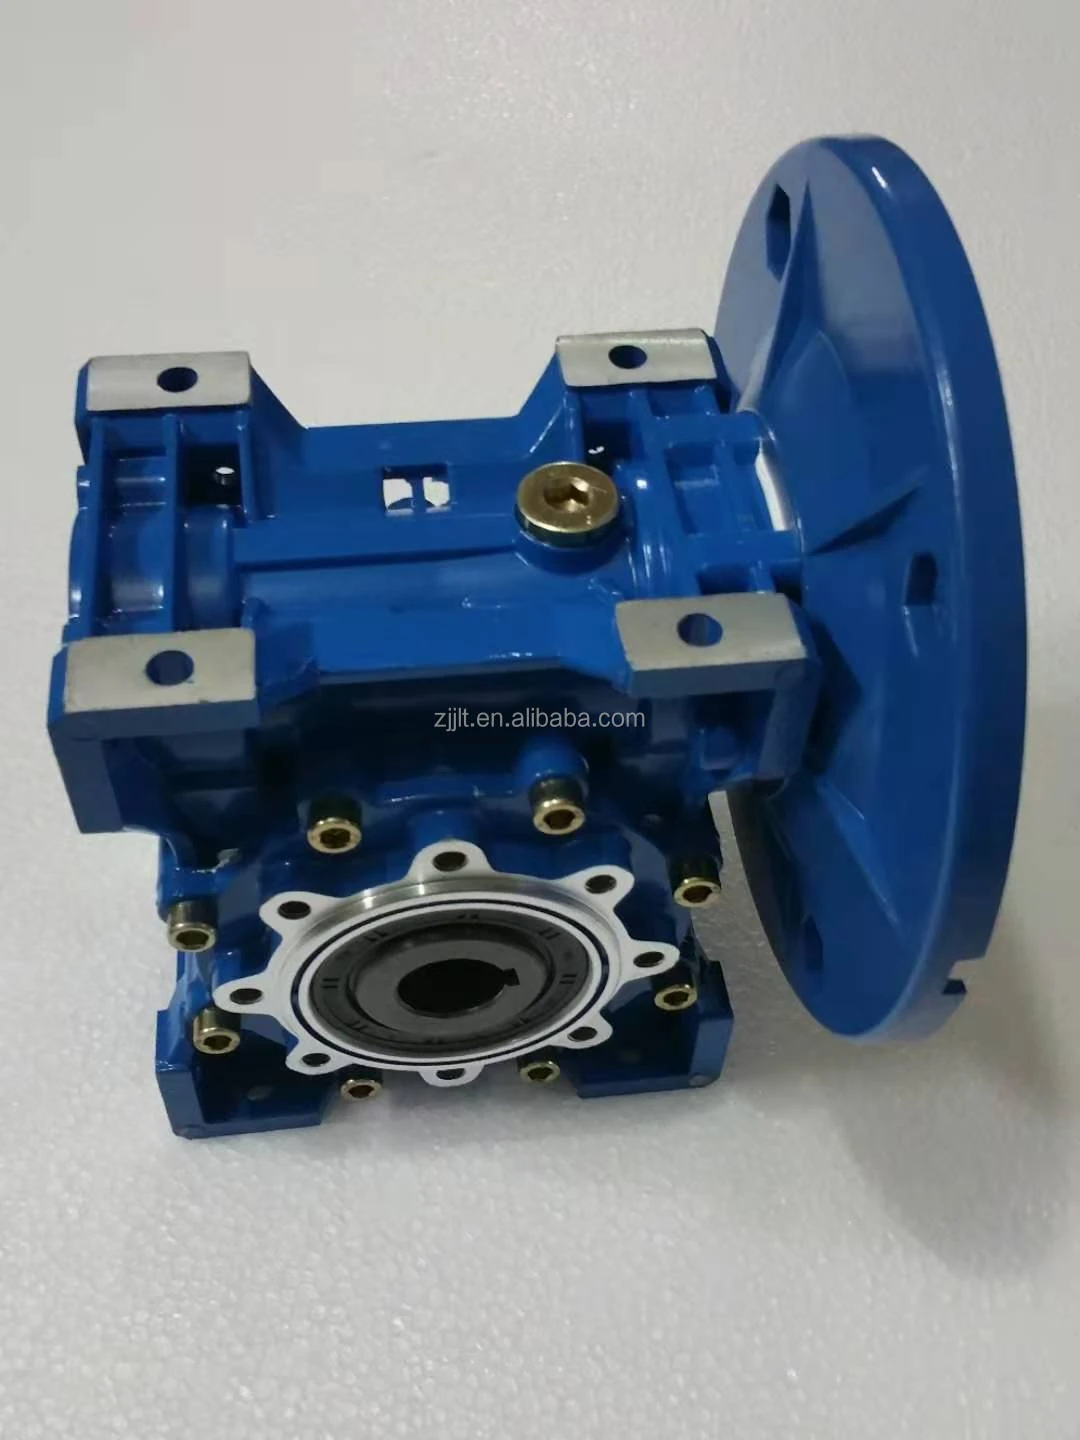 NMRV090 gearbox  with single-phase motor 70rpm ratio20